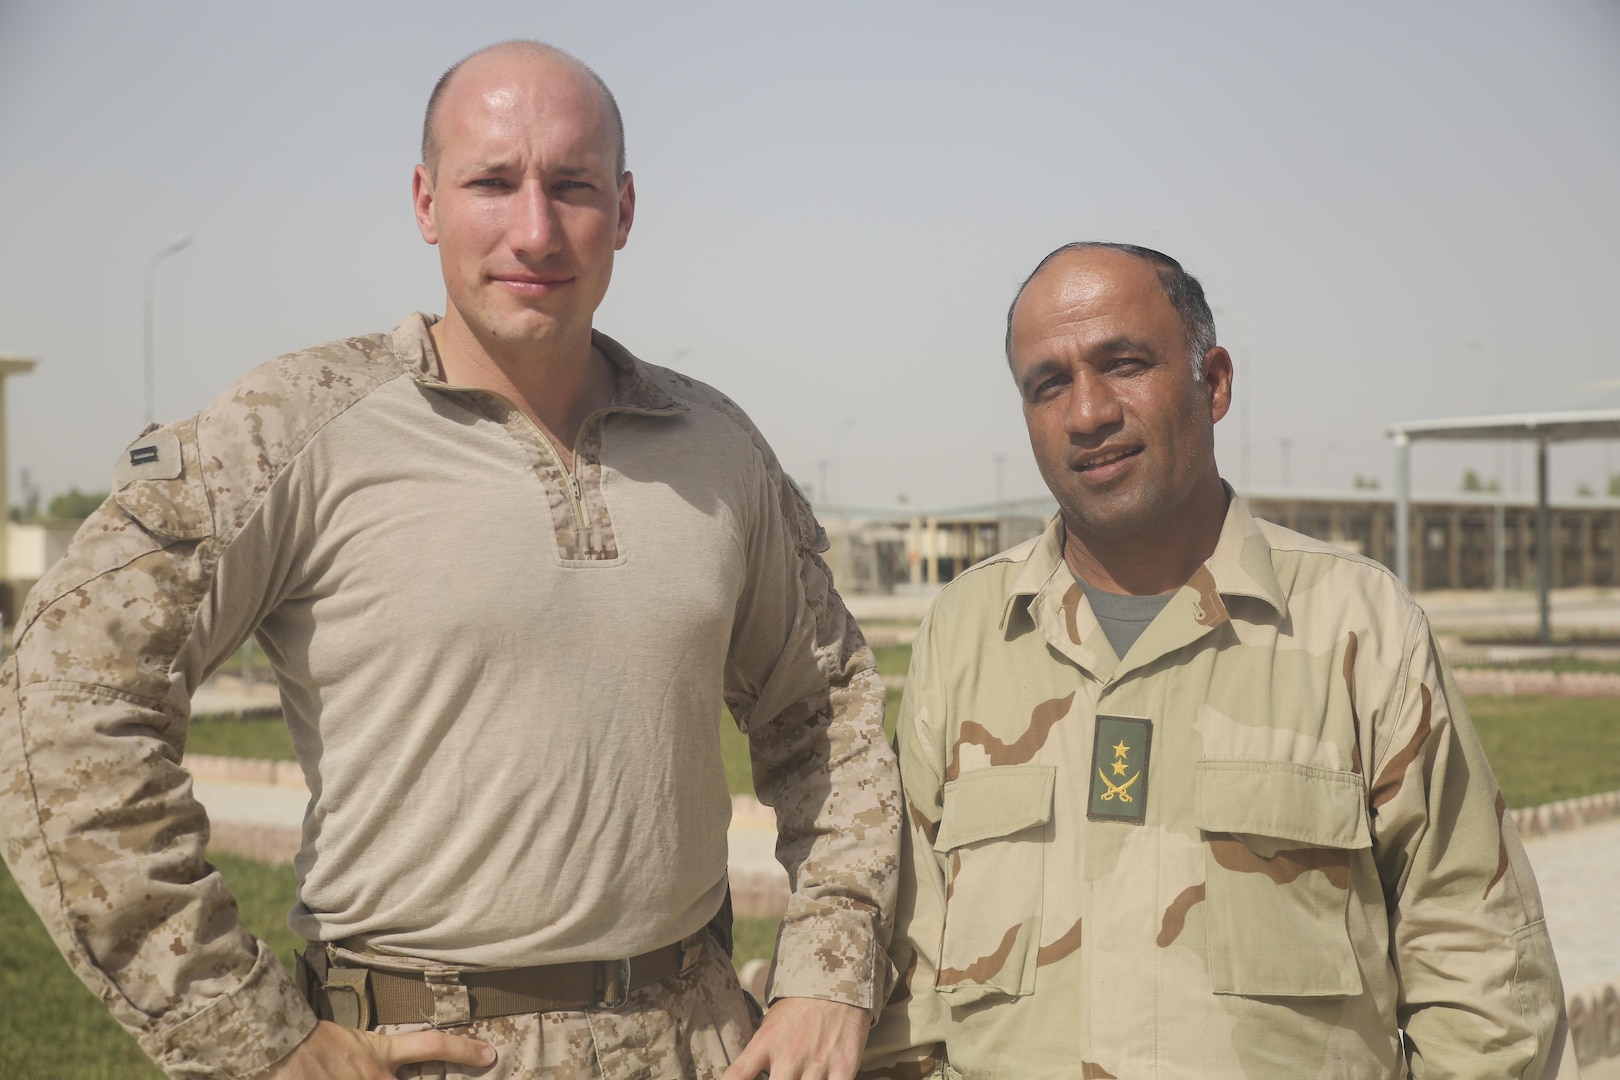 U.S. Marine Capt. Robert Walters, left, an advisor with Task Force Southwest, and Afghan National Army Lt. Col. Mirzashah Sadaq, right, the air officer of the 215th Corps, pose for a photo at Camp Shorabak, Afghanistan, Aug. 5, 2017. On July 24, two Mi-17s completed a casualty evacuation in the Nawa district of Helmand province in support of Operation Maiwand Four. Afghan National Army soldiers with 215th Corps successfully planned and prepared for potential CASEVACs during the operation with assistance and support from U.S. Marine advisors assigned to Task Force Southwest. The Afghan forces extracted the wounded soldier from the battlefield within an hour of notification, which allowed for quicker medical care and saved the soldier’s life. (U.S. Marine Corps photo by Sgt. Lucas Hopkins)